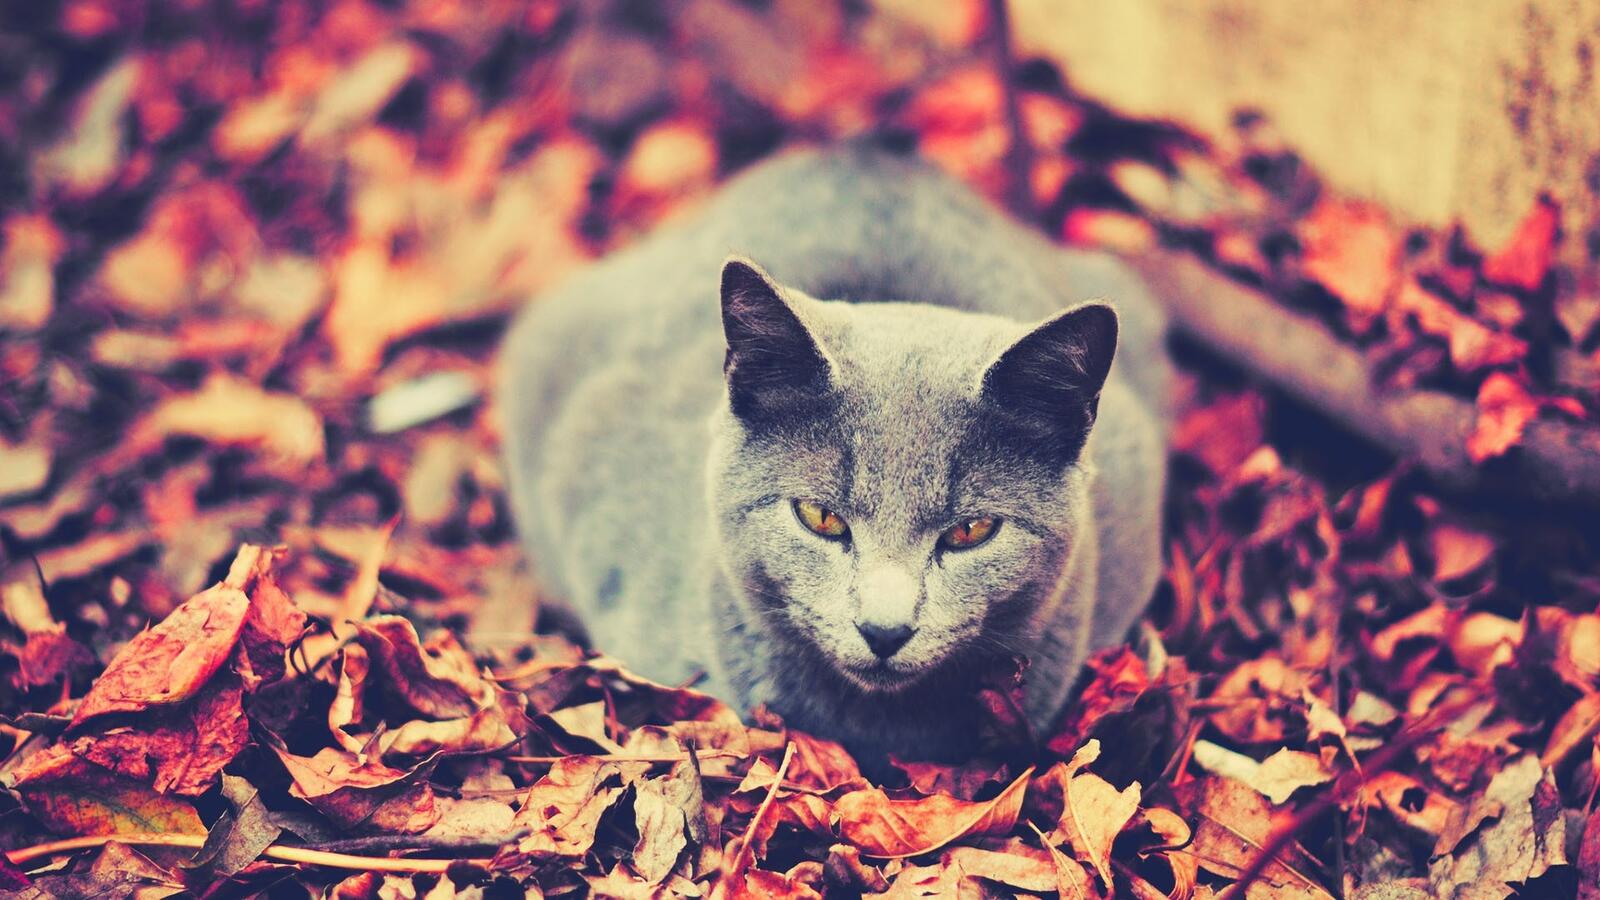 Free photo A gray cat sits on fallen leaves